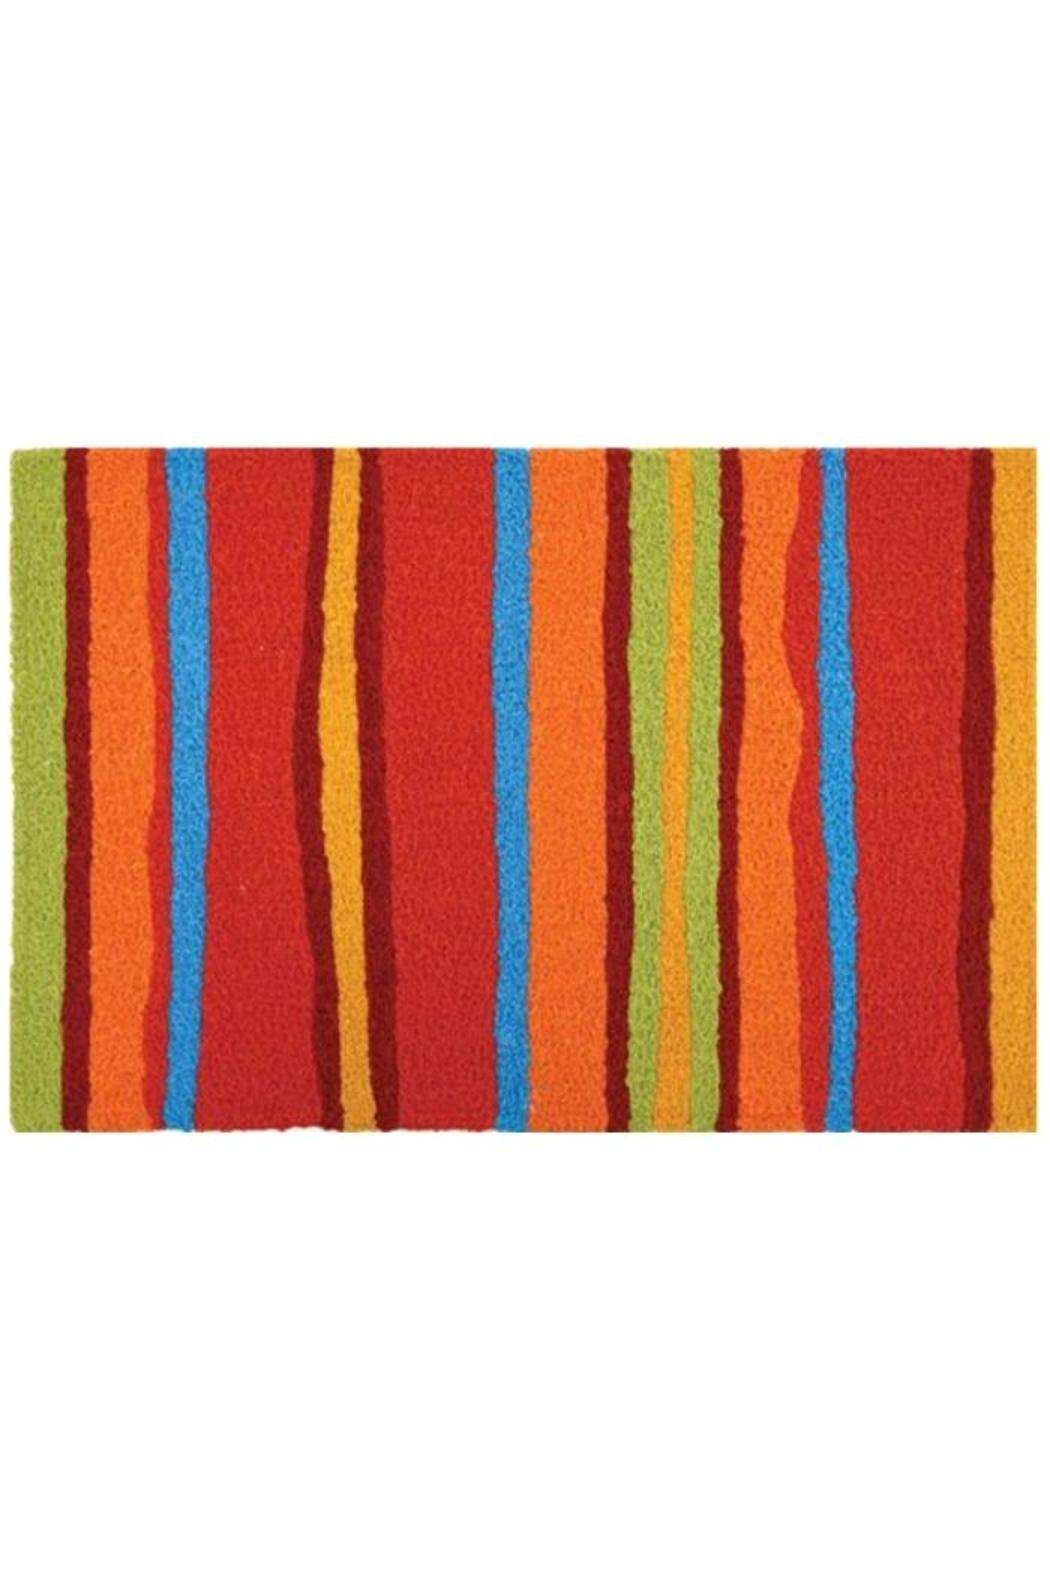 Jelly Bean Rugs Jelly Bean Rugs Fiesta Floor Mat Fiestas 30th and Boutique